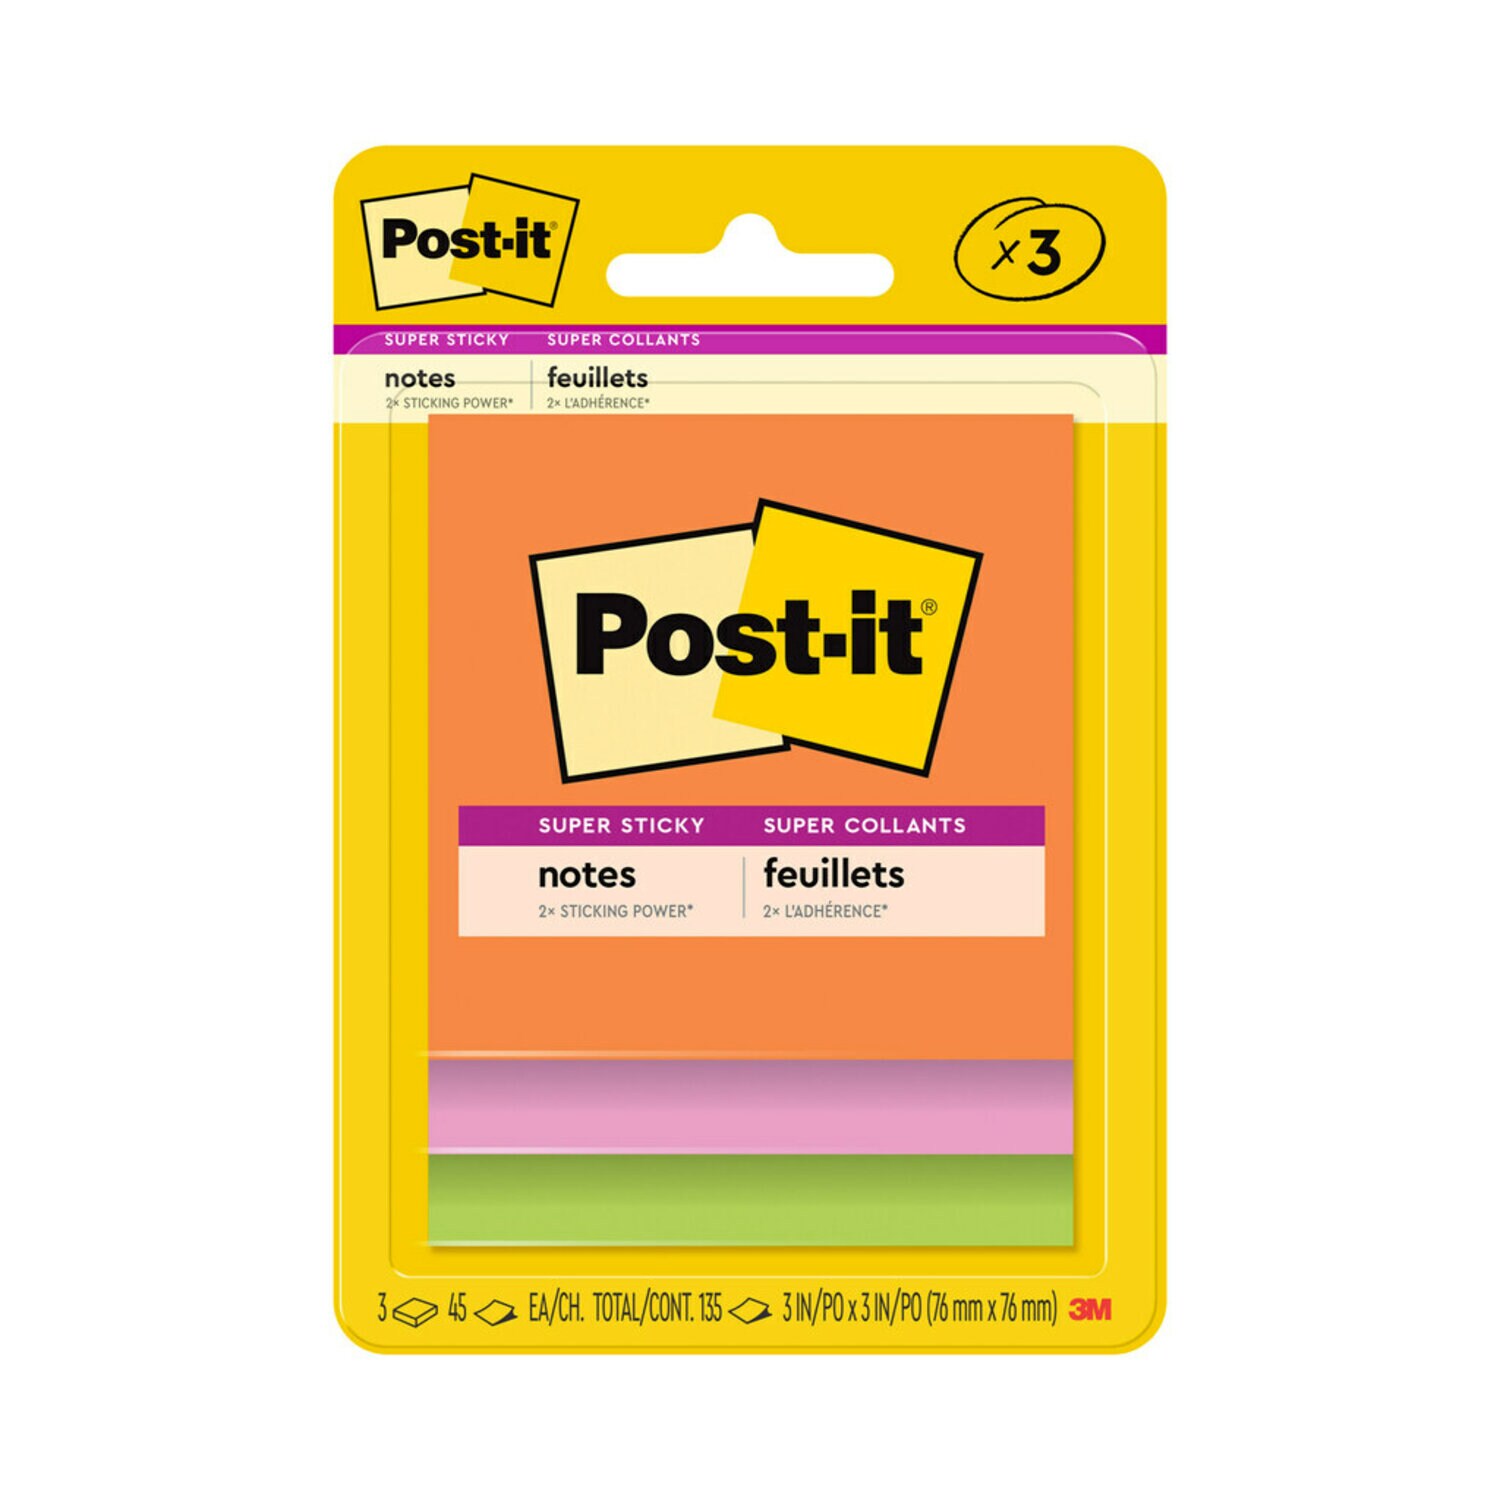 Post-it Super Sticky Full Stick Notes, 3x3 in, 12 Pads, 2x the Sticking  Power, Energy Boost Collection, Bright Colors (Orange, Pink, Blue, Green)